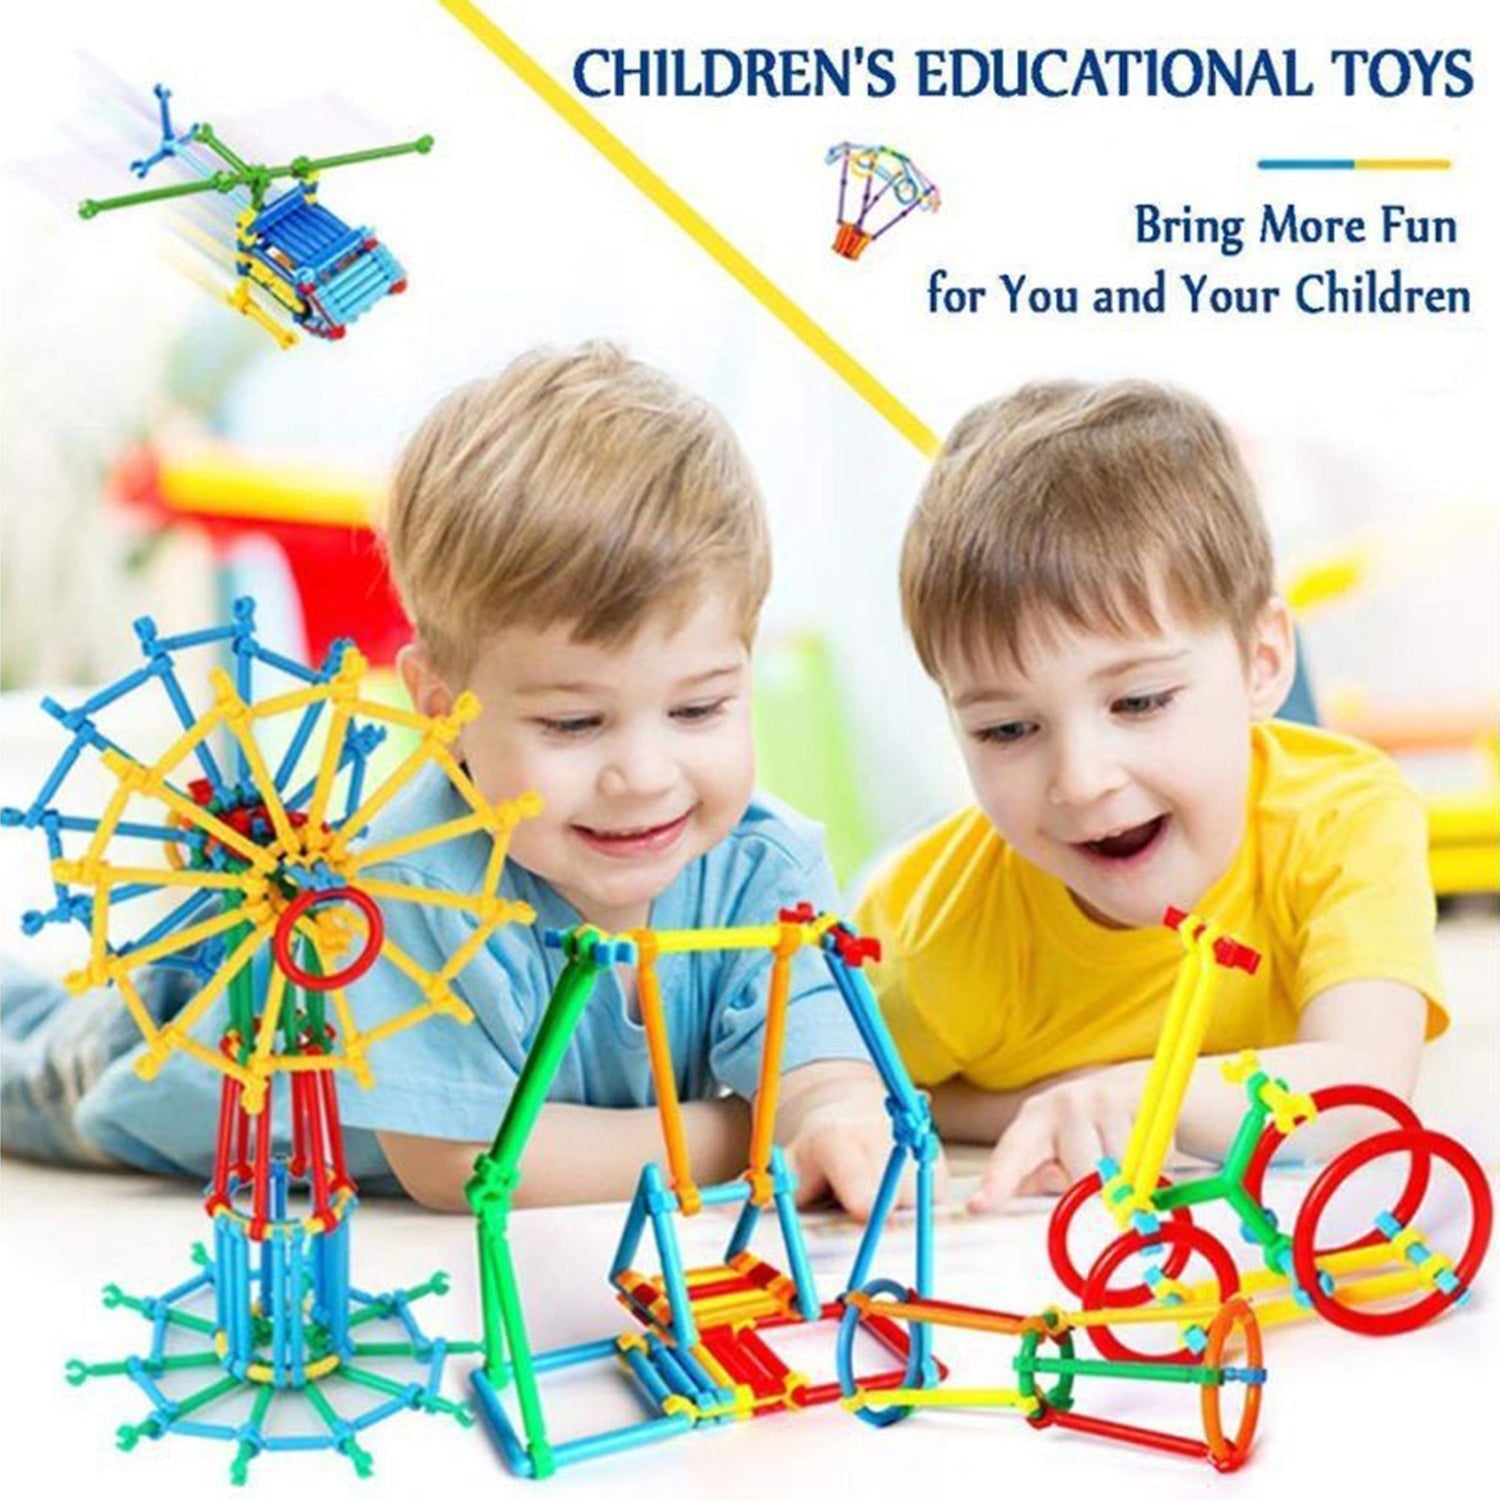 3905 400 Pc Sticks Blocks Toy used in all kinds of household and official places by kids and children's specially for playing and enjoying purposes. DeoDap